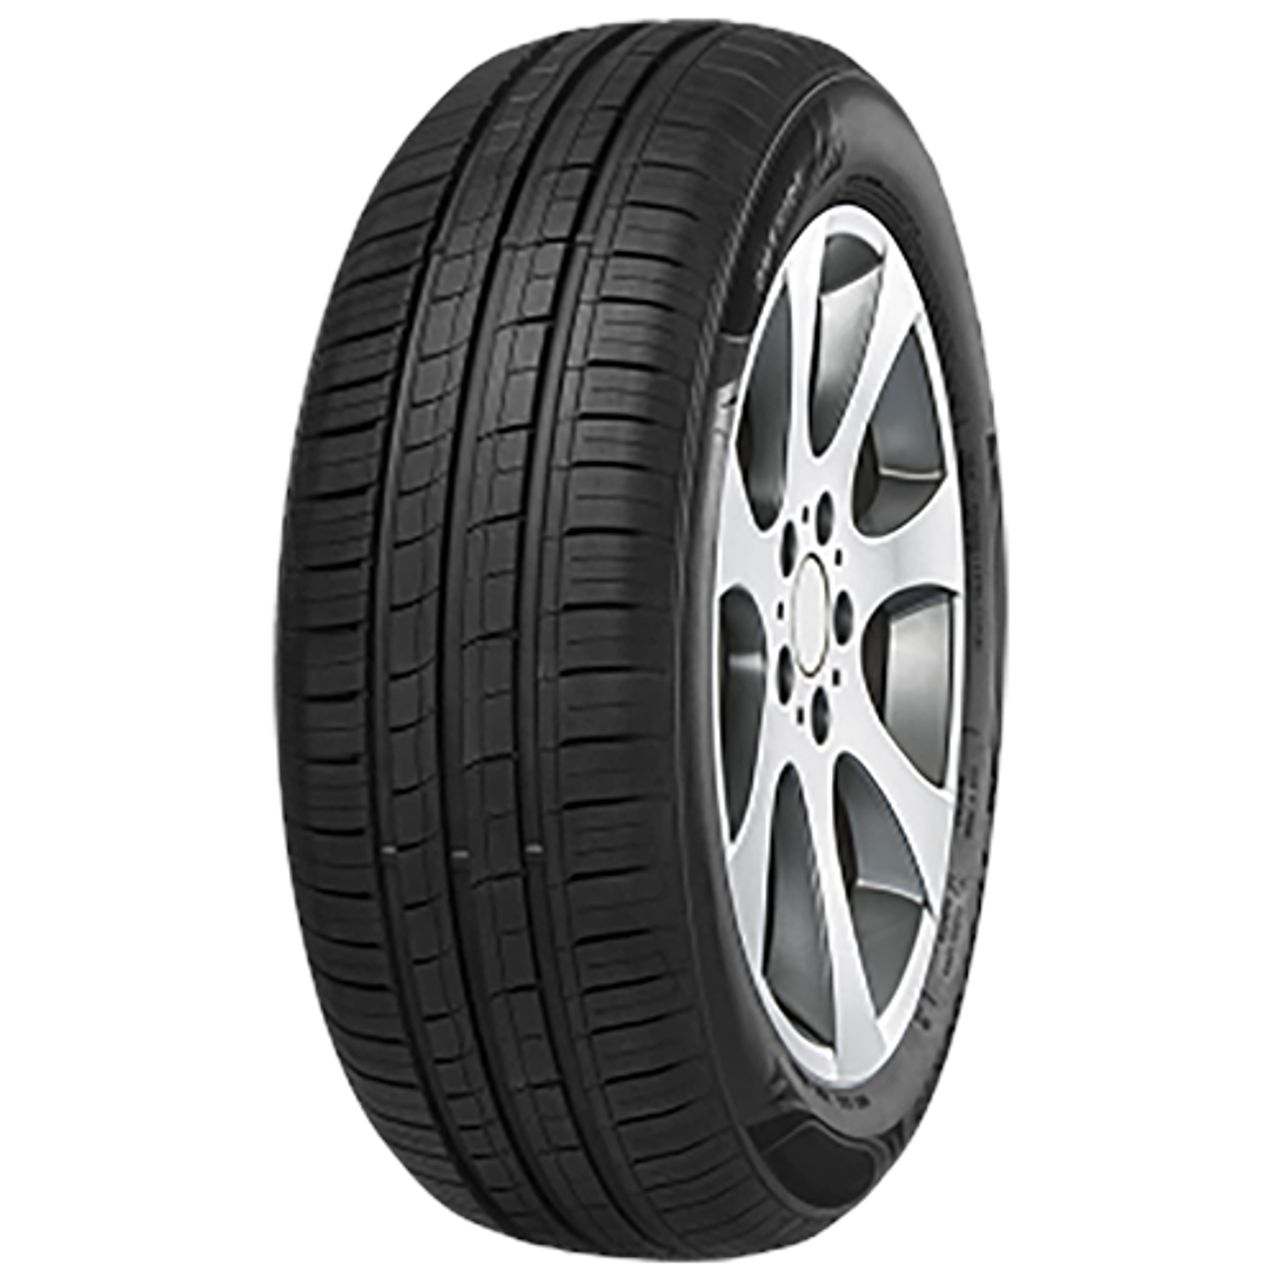 IMPERIAL ECODRIVER 4 165/55R14 72H BSW